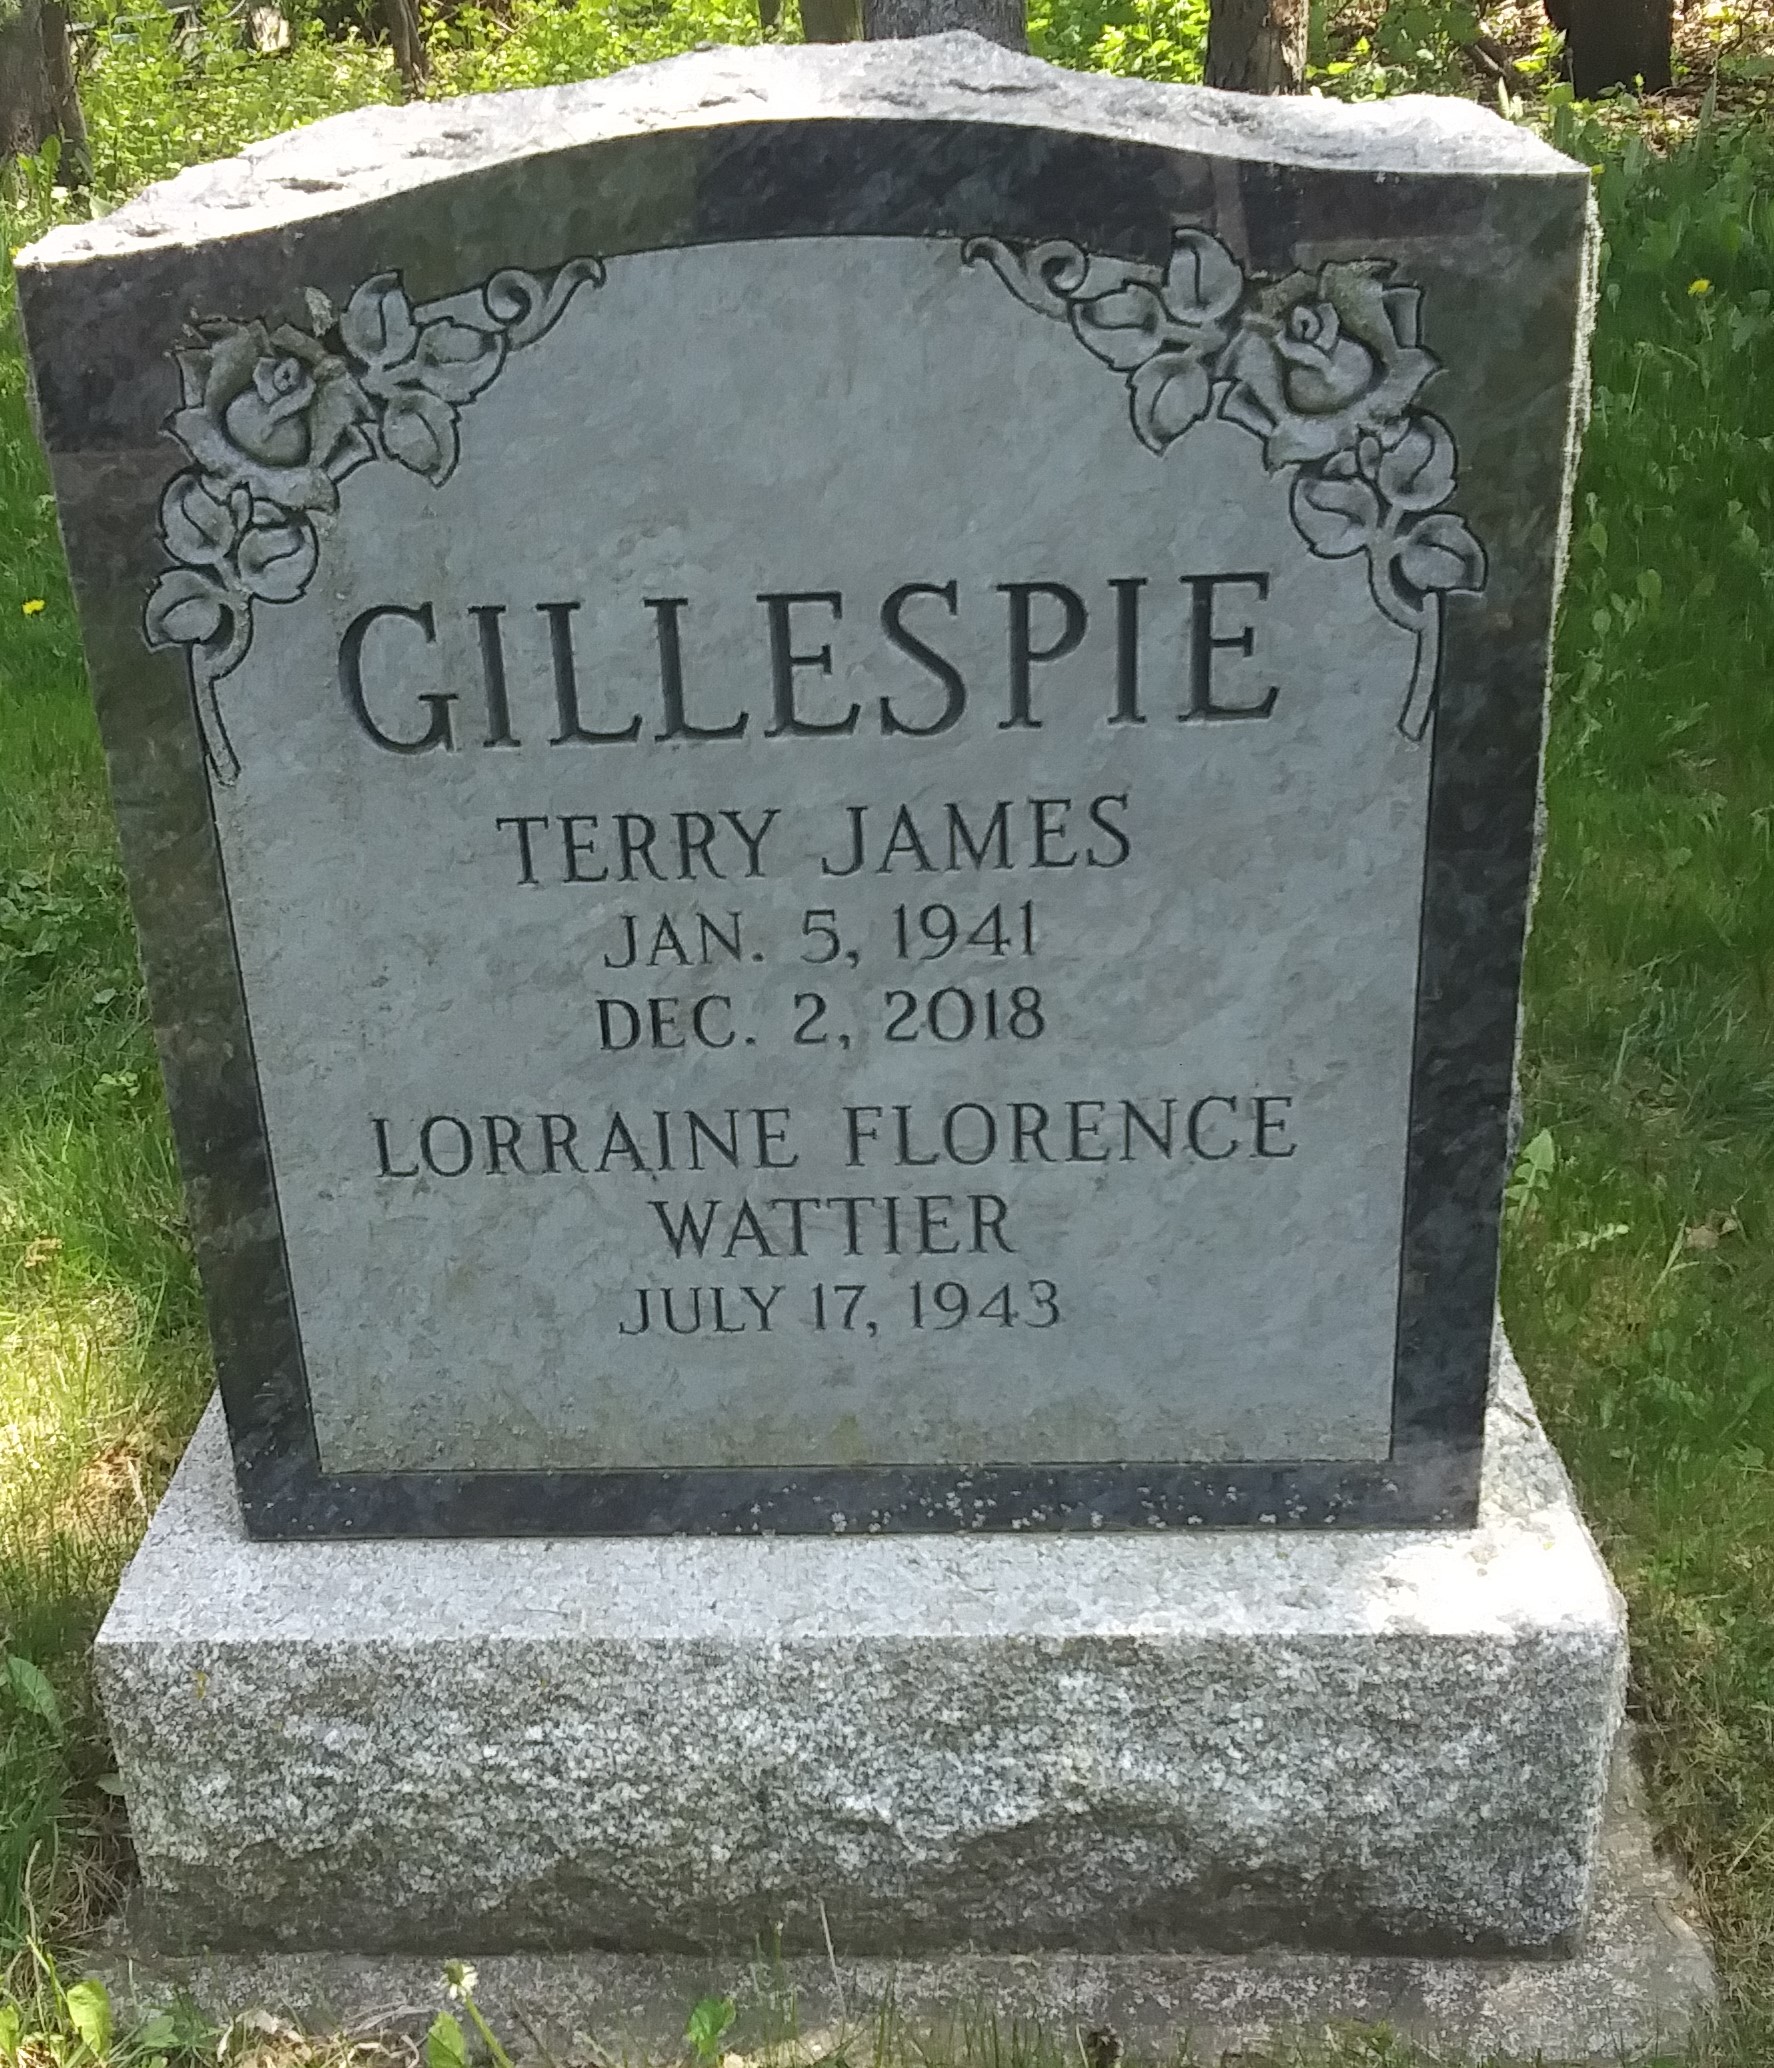 Tombstone Terry Gillespie, Guelph